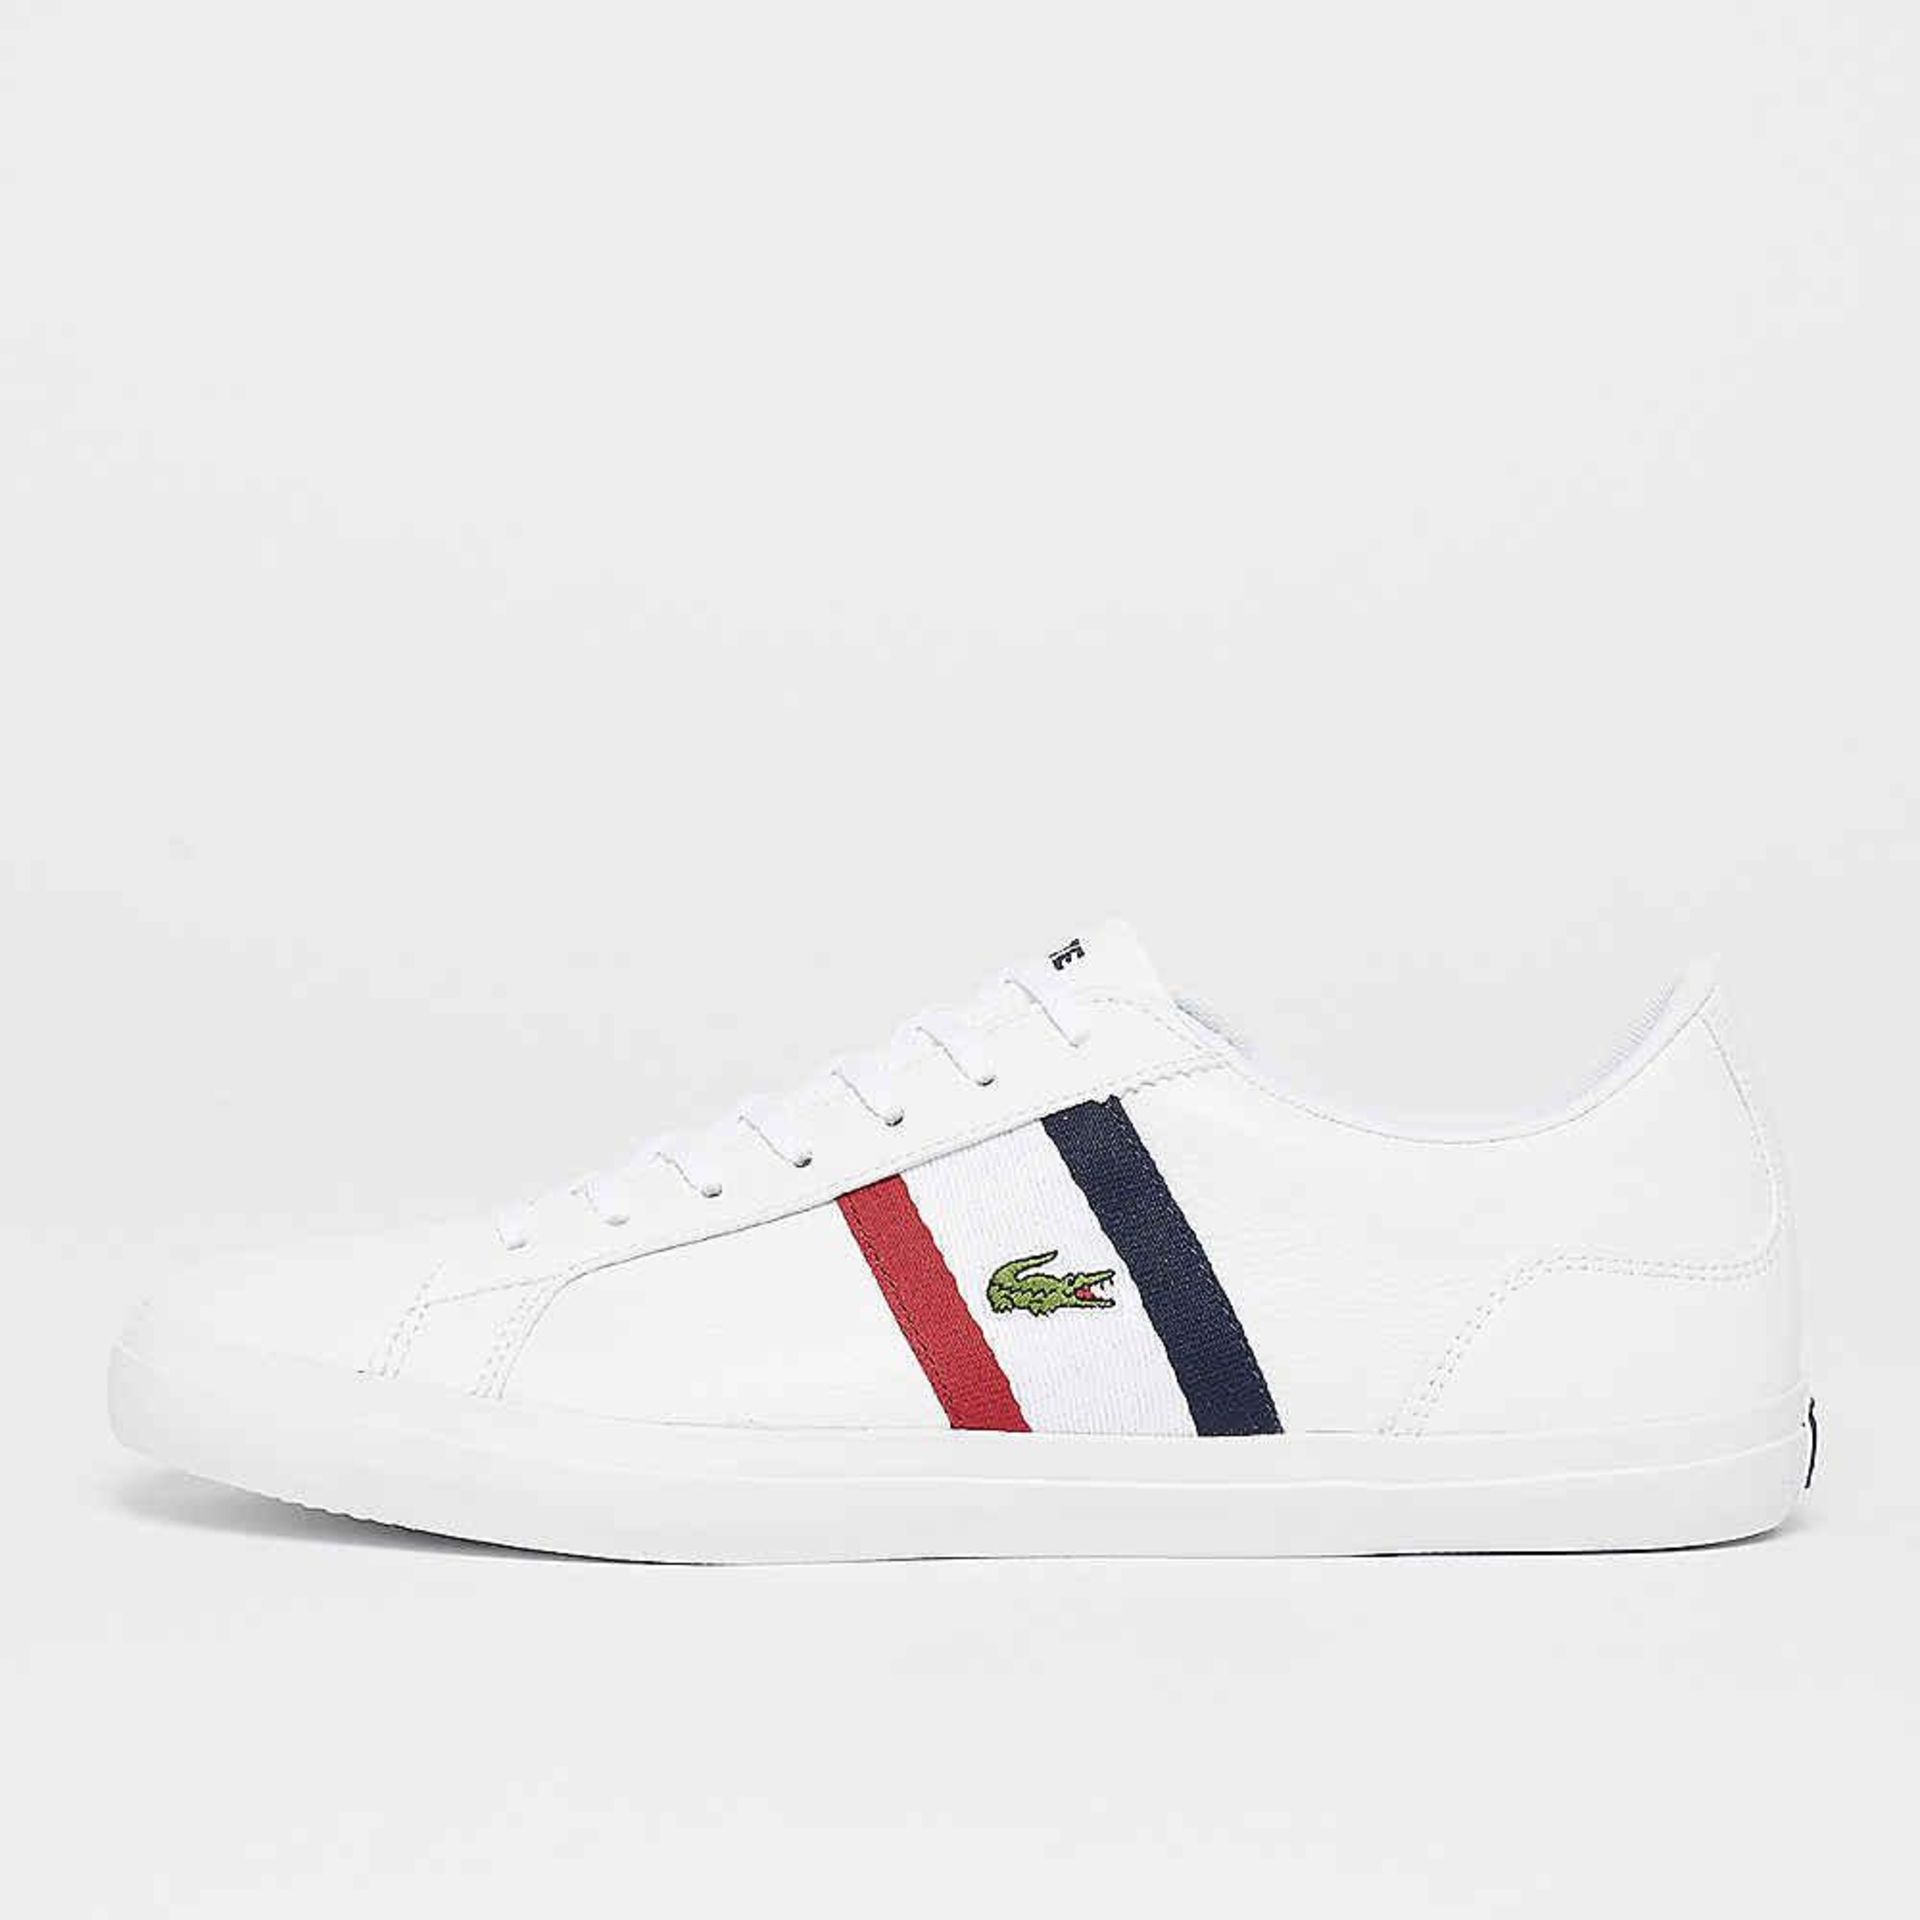 + VAT Brand New Lacoste Trainers UK Size 8 - White Red Navy - Leather & Synthetic - EU Size 42 - US